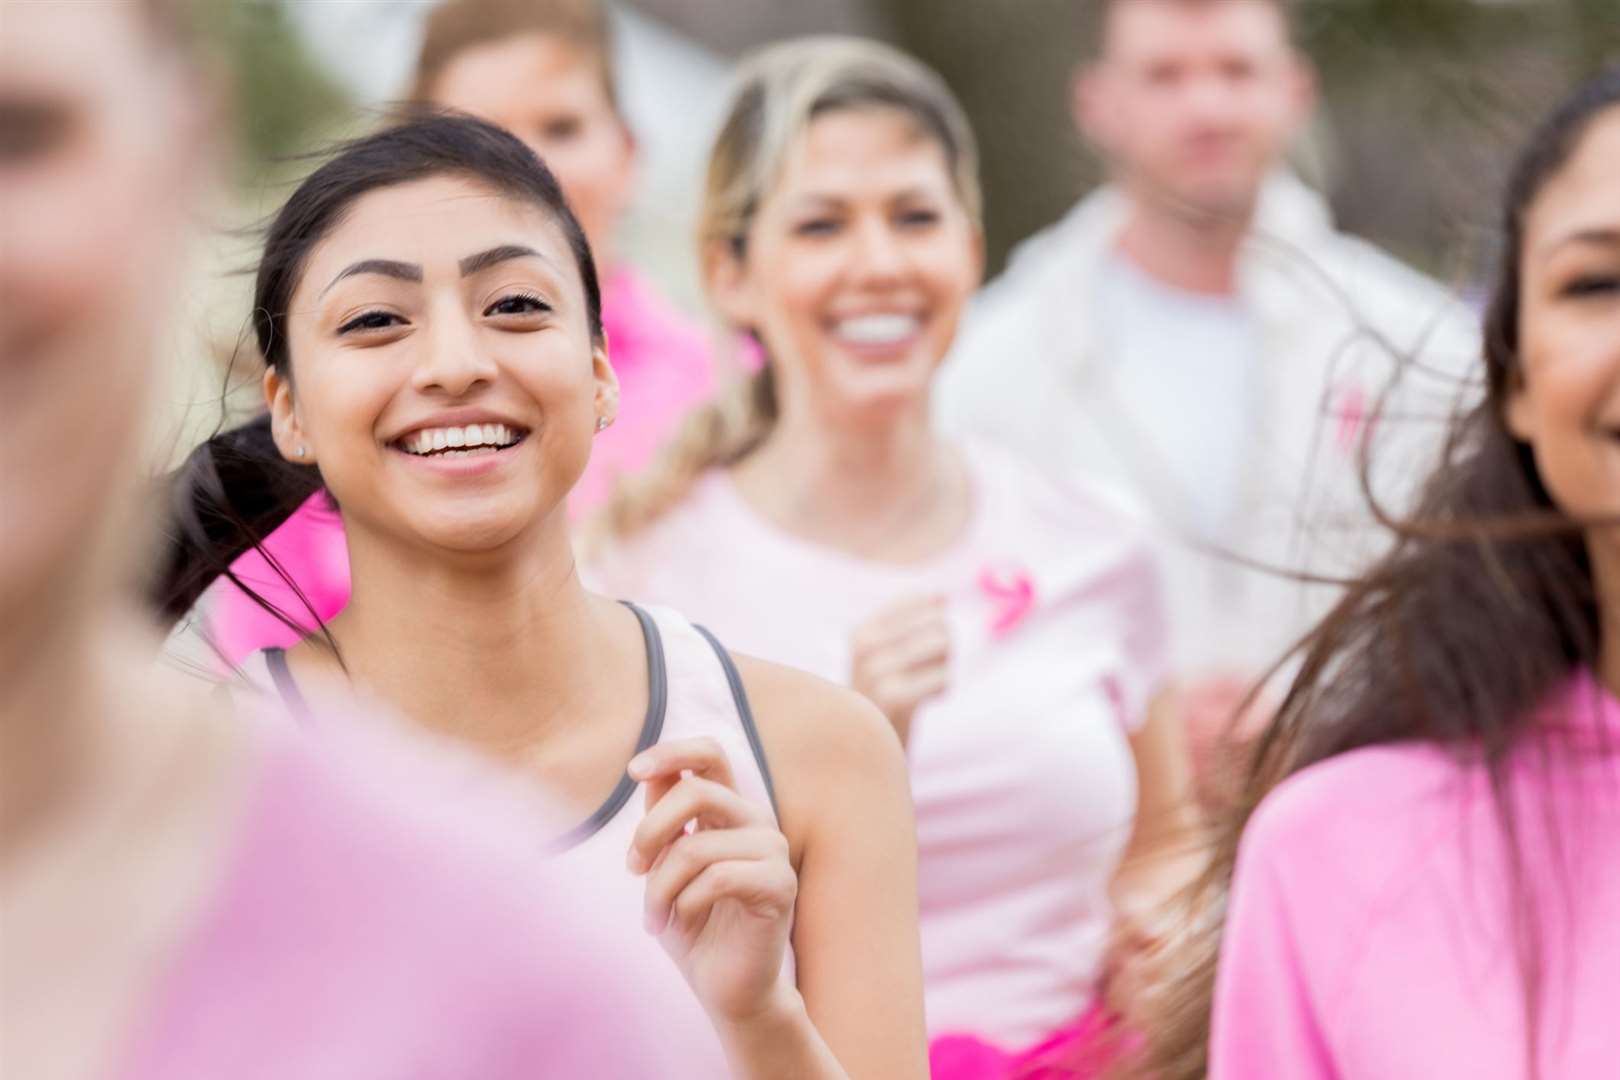 Whether you're running for a good cause, fitness or fun, you can take part in a charity race and make a difference this year. Picture: iStock